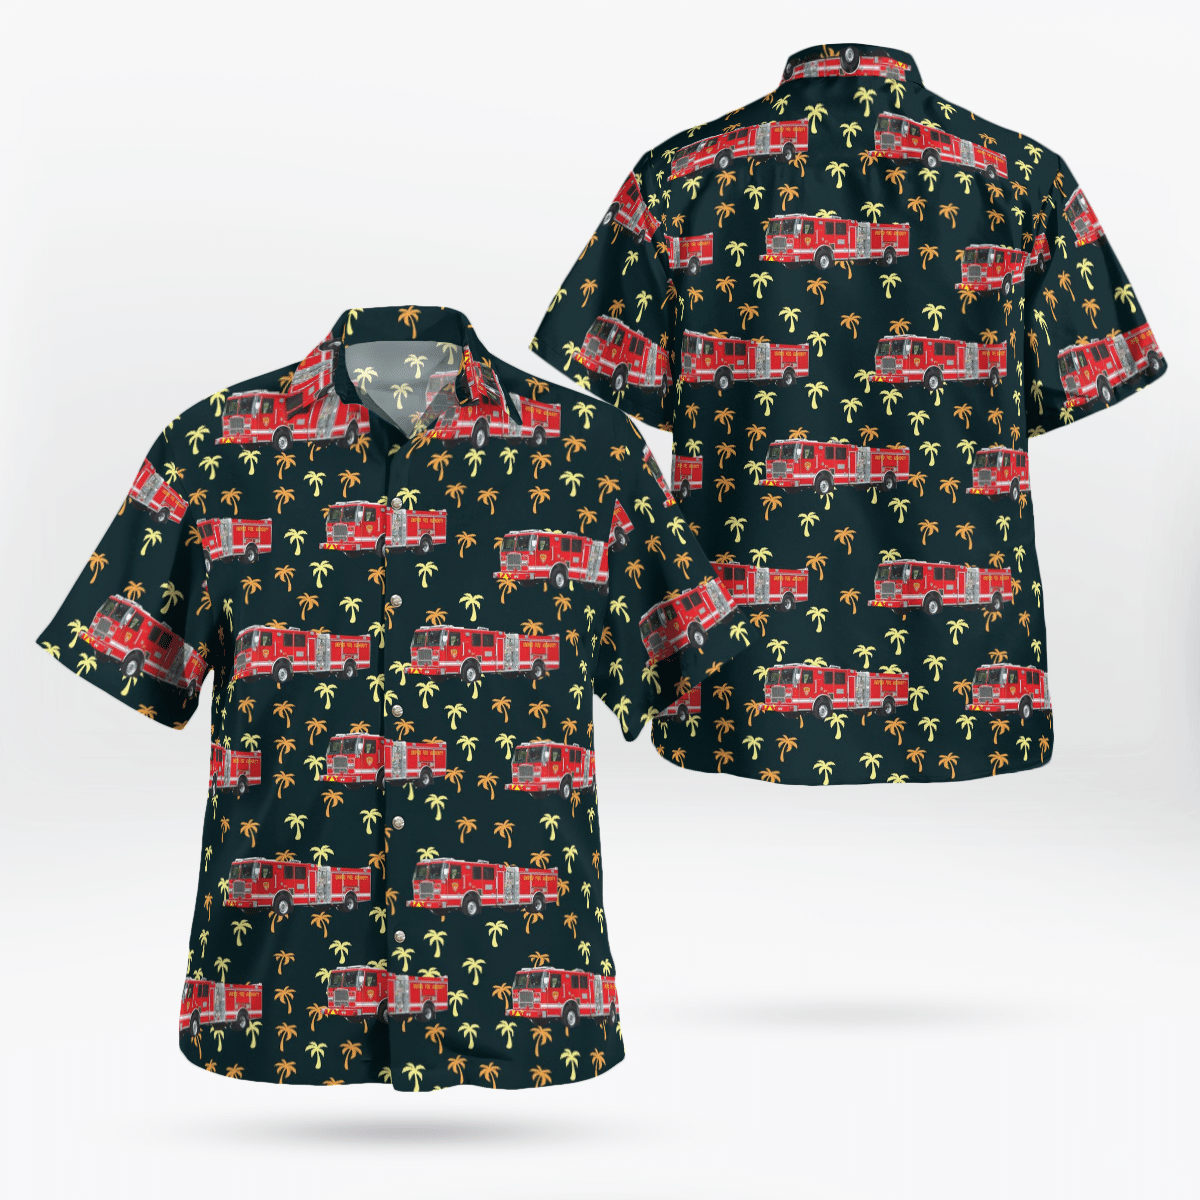 Consider getting these Hawaiian Shirt for your friends 239